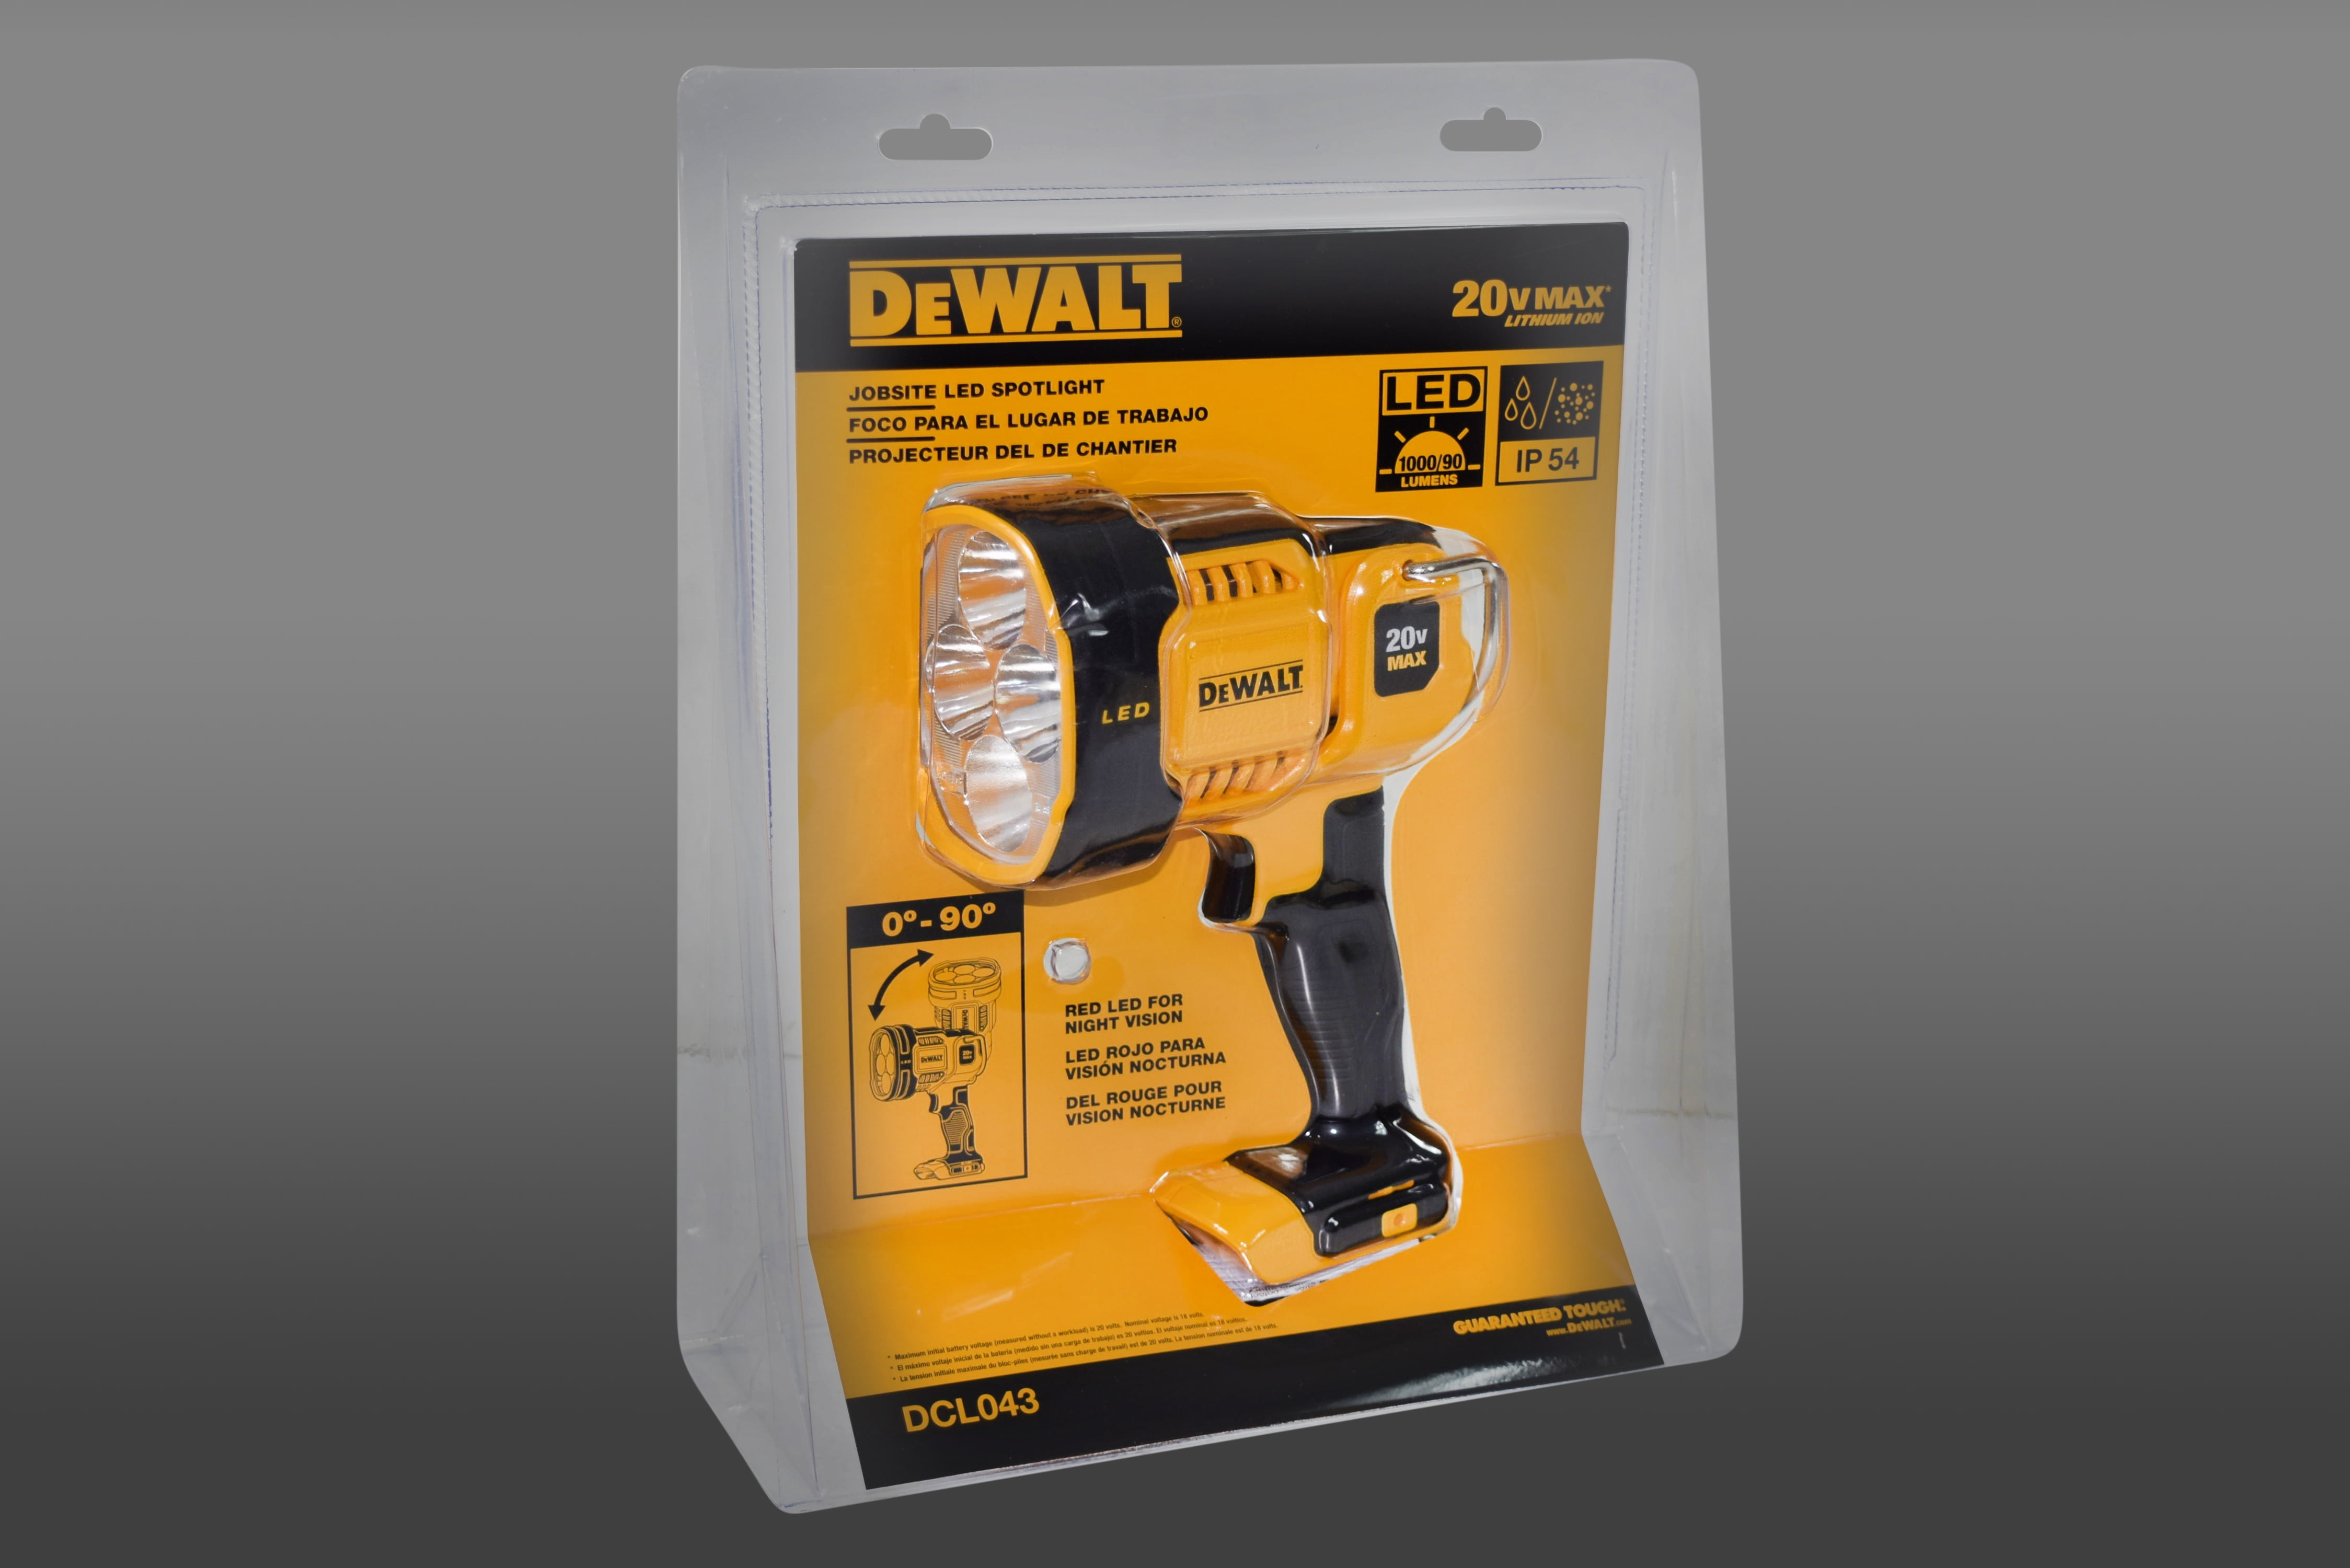 DEWALT 20V MAX LED Work Light, Handheld Spotlight with 508 Yard Distance,  Pivoting Head, 1500 Lumens, Cordless, Battery Not Included (DCL043)